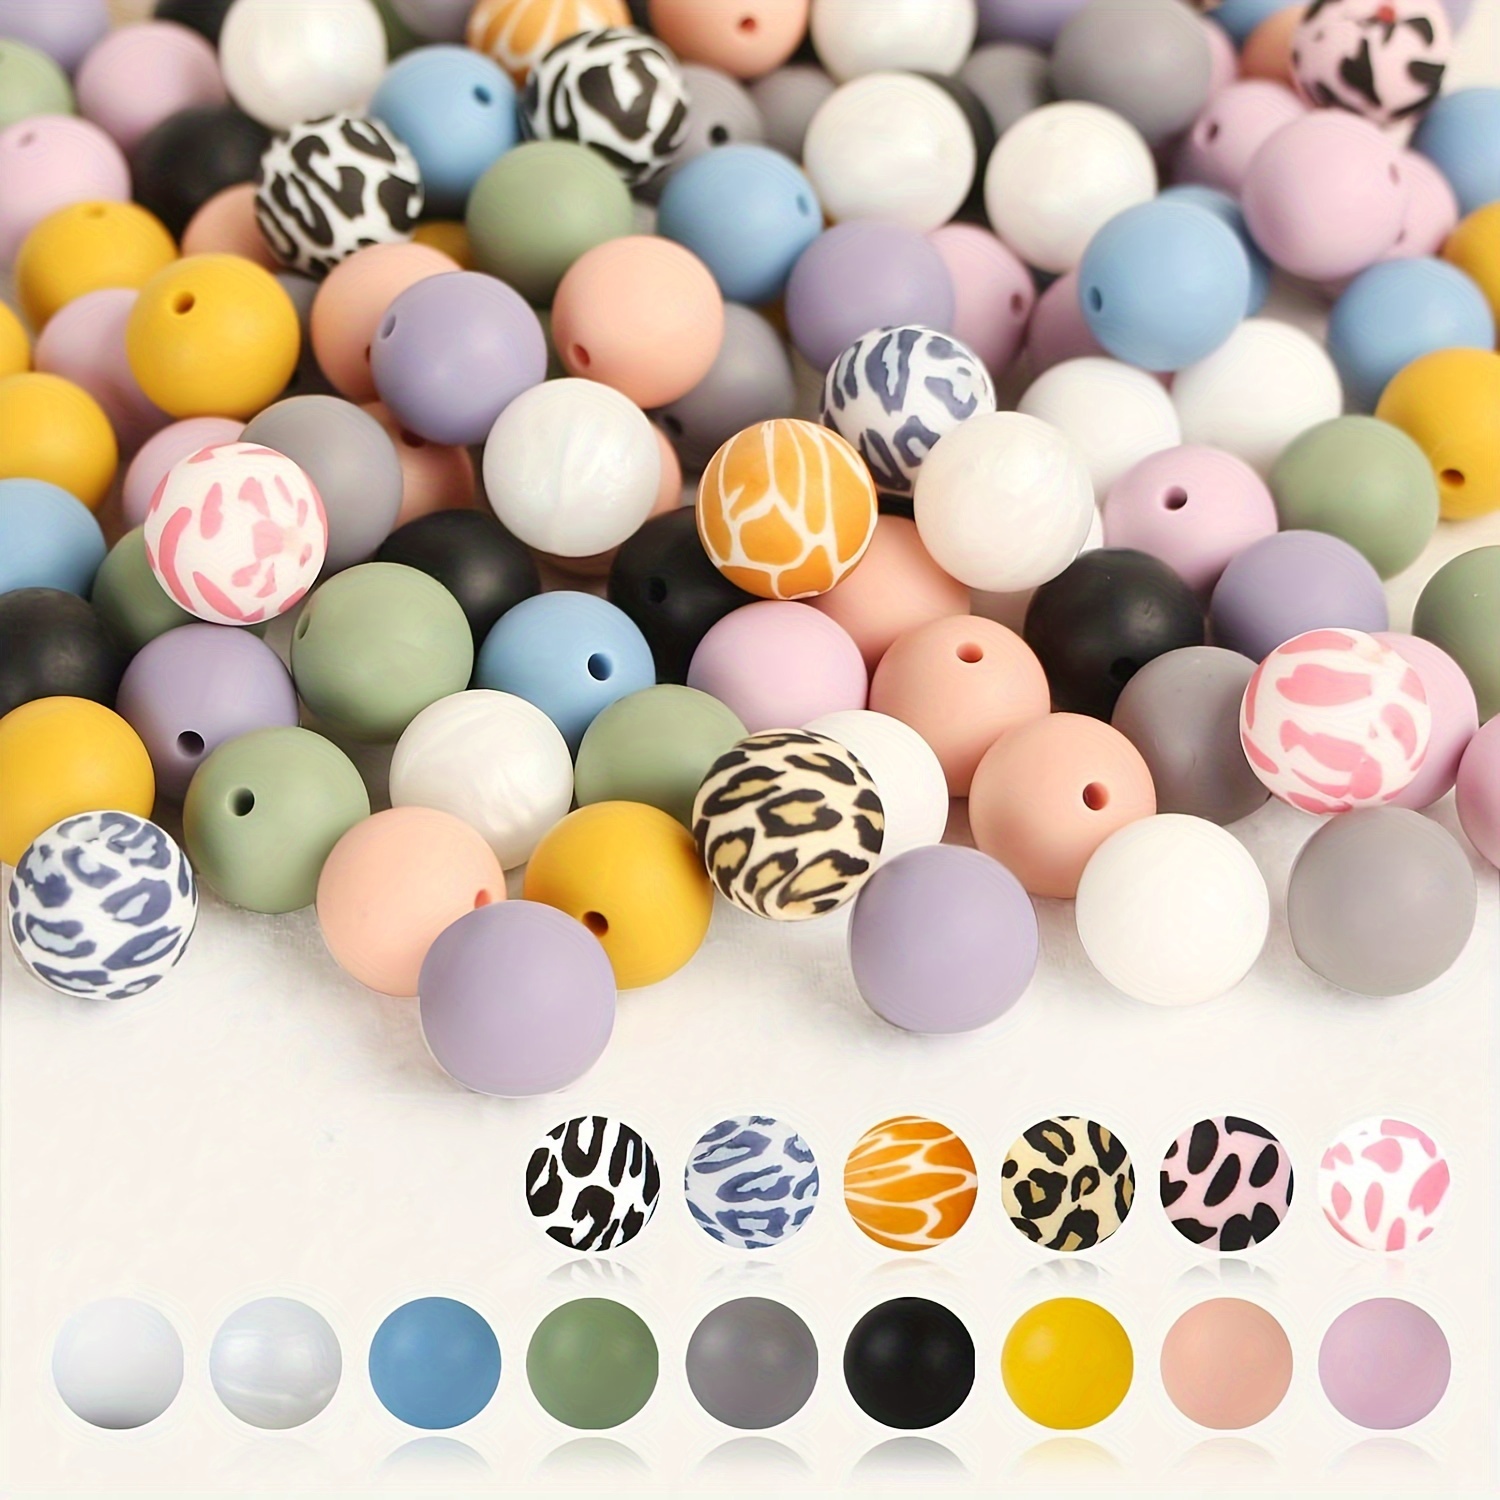 

153pcs Silicone Beads 15mm Silicone Beads Bulk For Keychain Making 15 Styles Loose Round Rubber Pop Beads For Pens, Necklace Bracelet Making Kit, Jewelry, Art, Crafts, Diy Jewelry Accessories